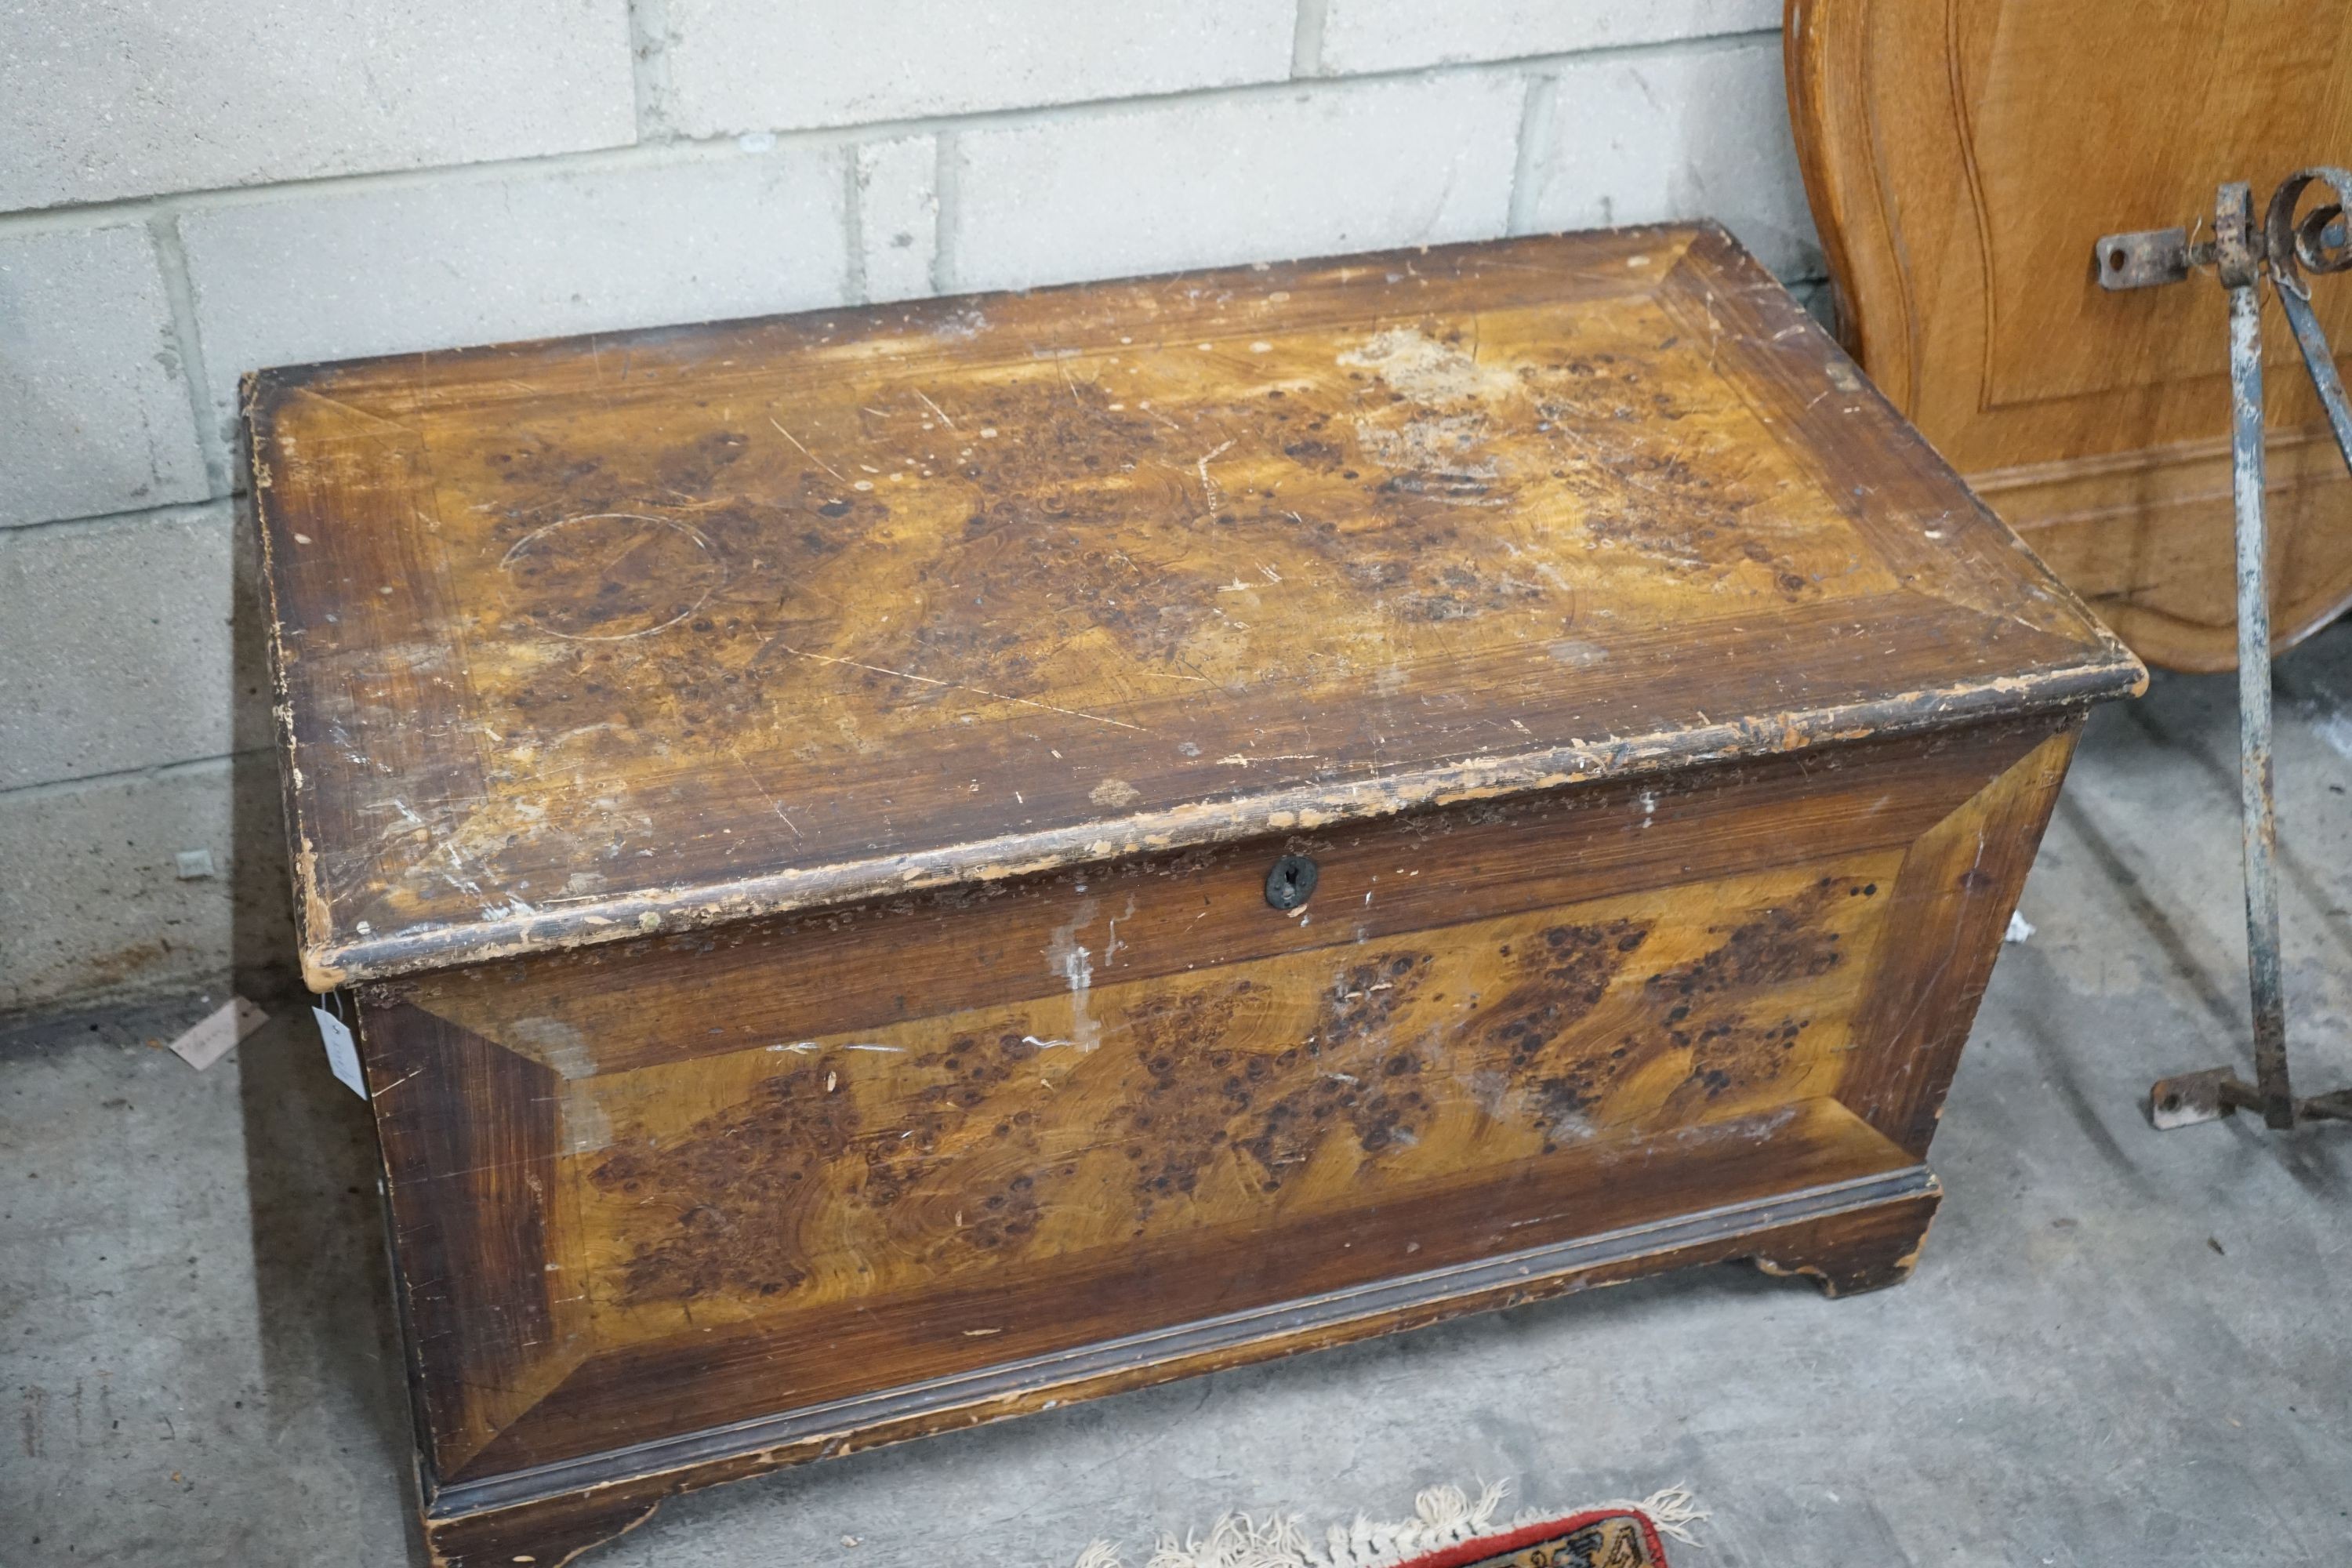 A Victorian pine trunk with simulated painted grain, width 108cm, depth 58cm, height 60cm